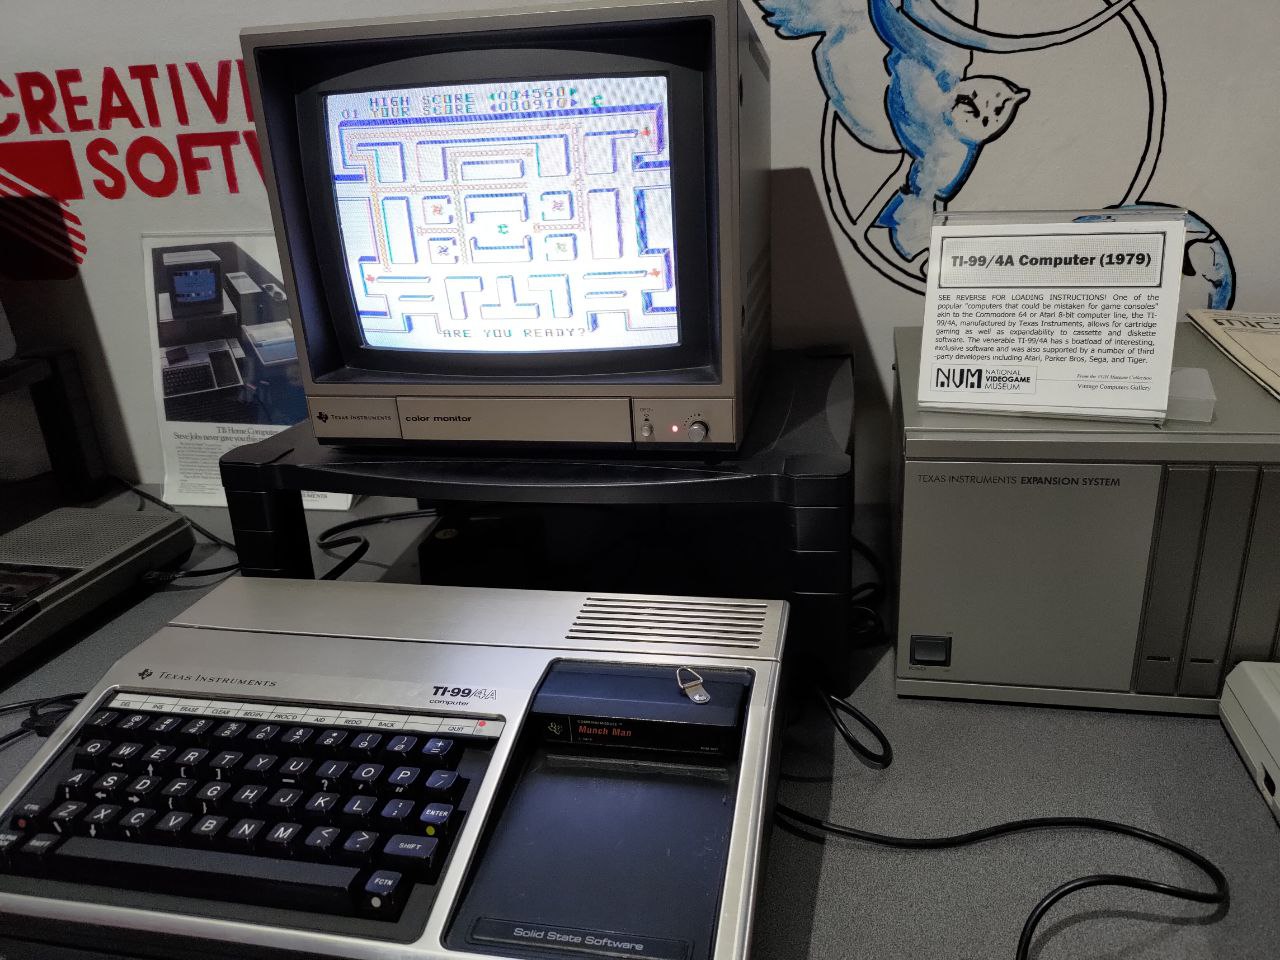 A TI-99/4A Computer on display in the National Videogame Museum. On the screen is a rudimentary maze game similar to Pac-Man